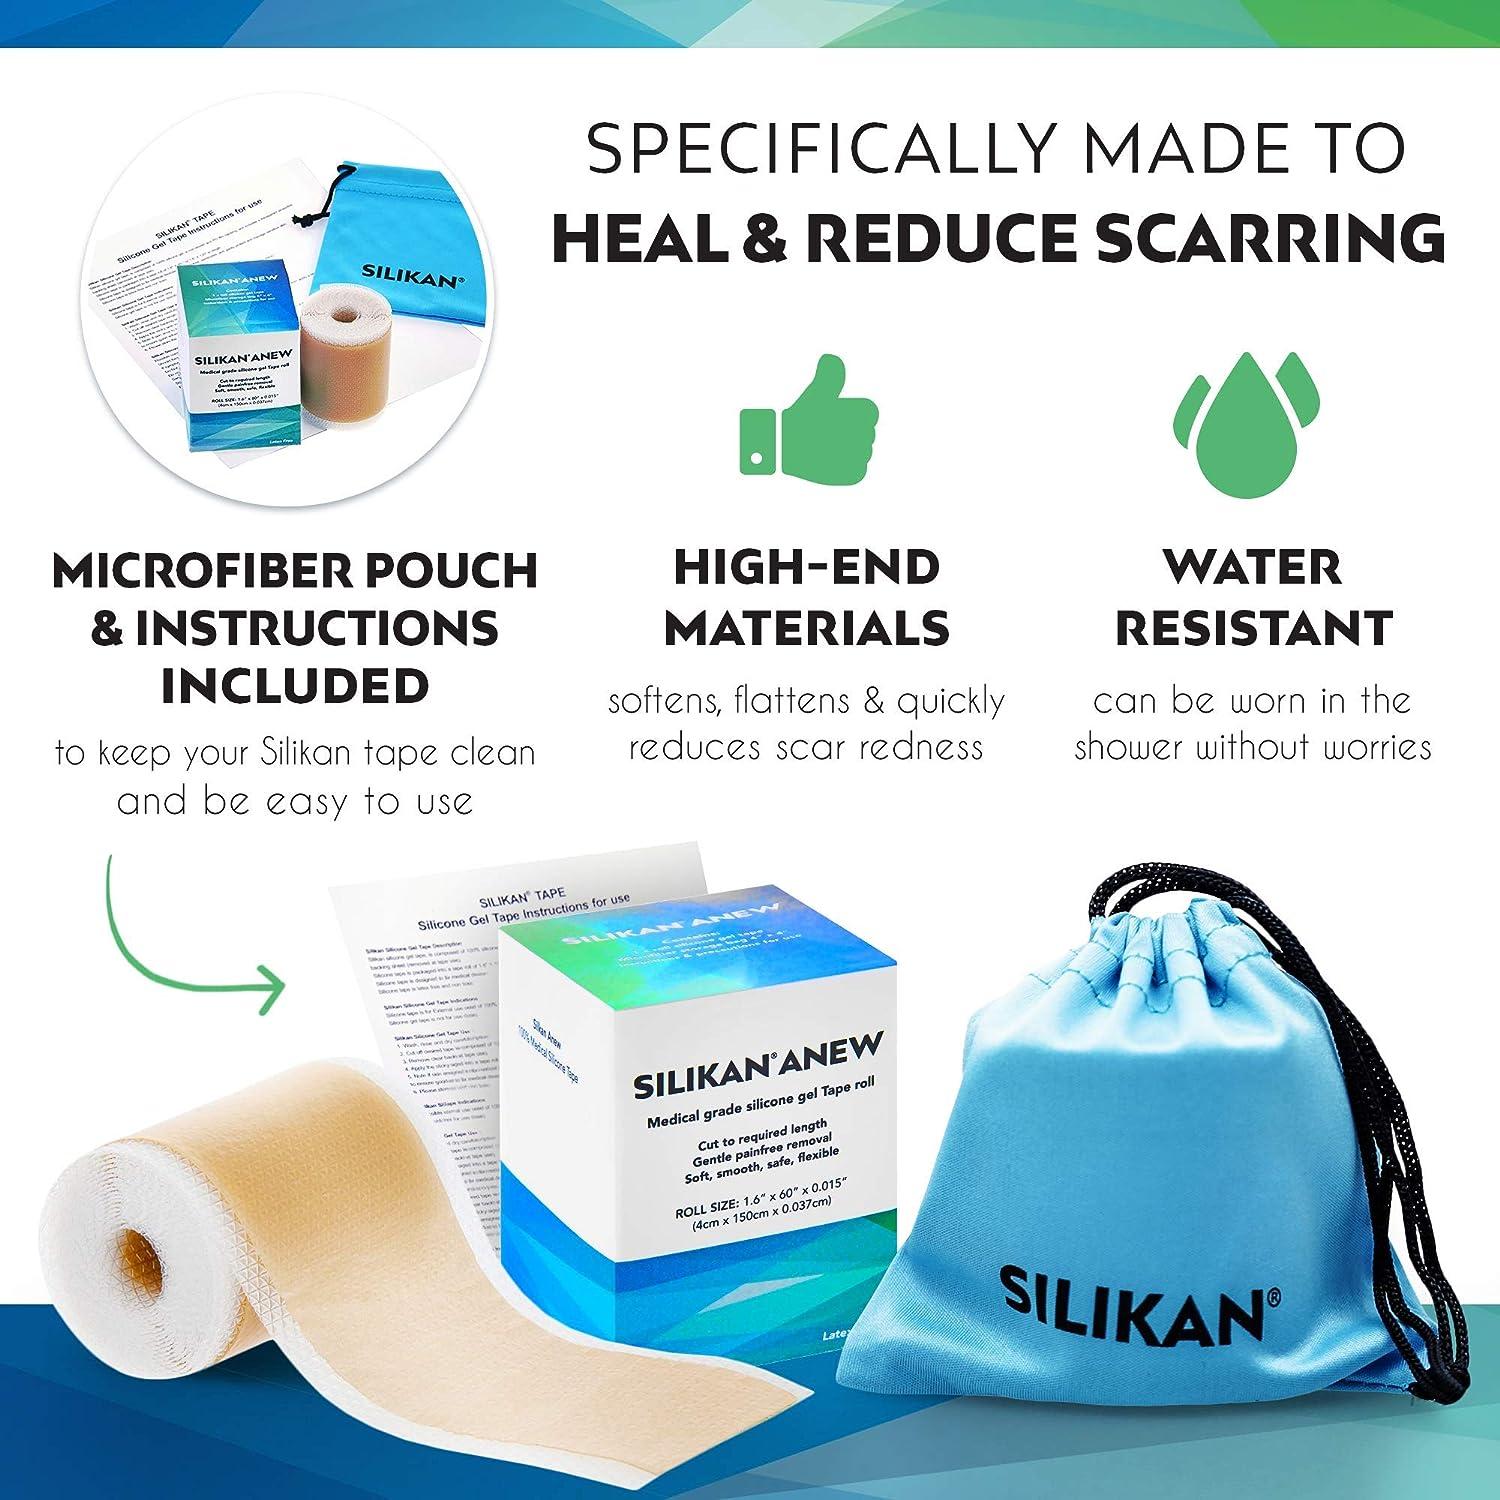 ALL ABOUT THAT EASY CLEAN. Silicone pouch removes for quick